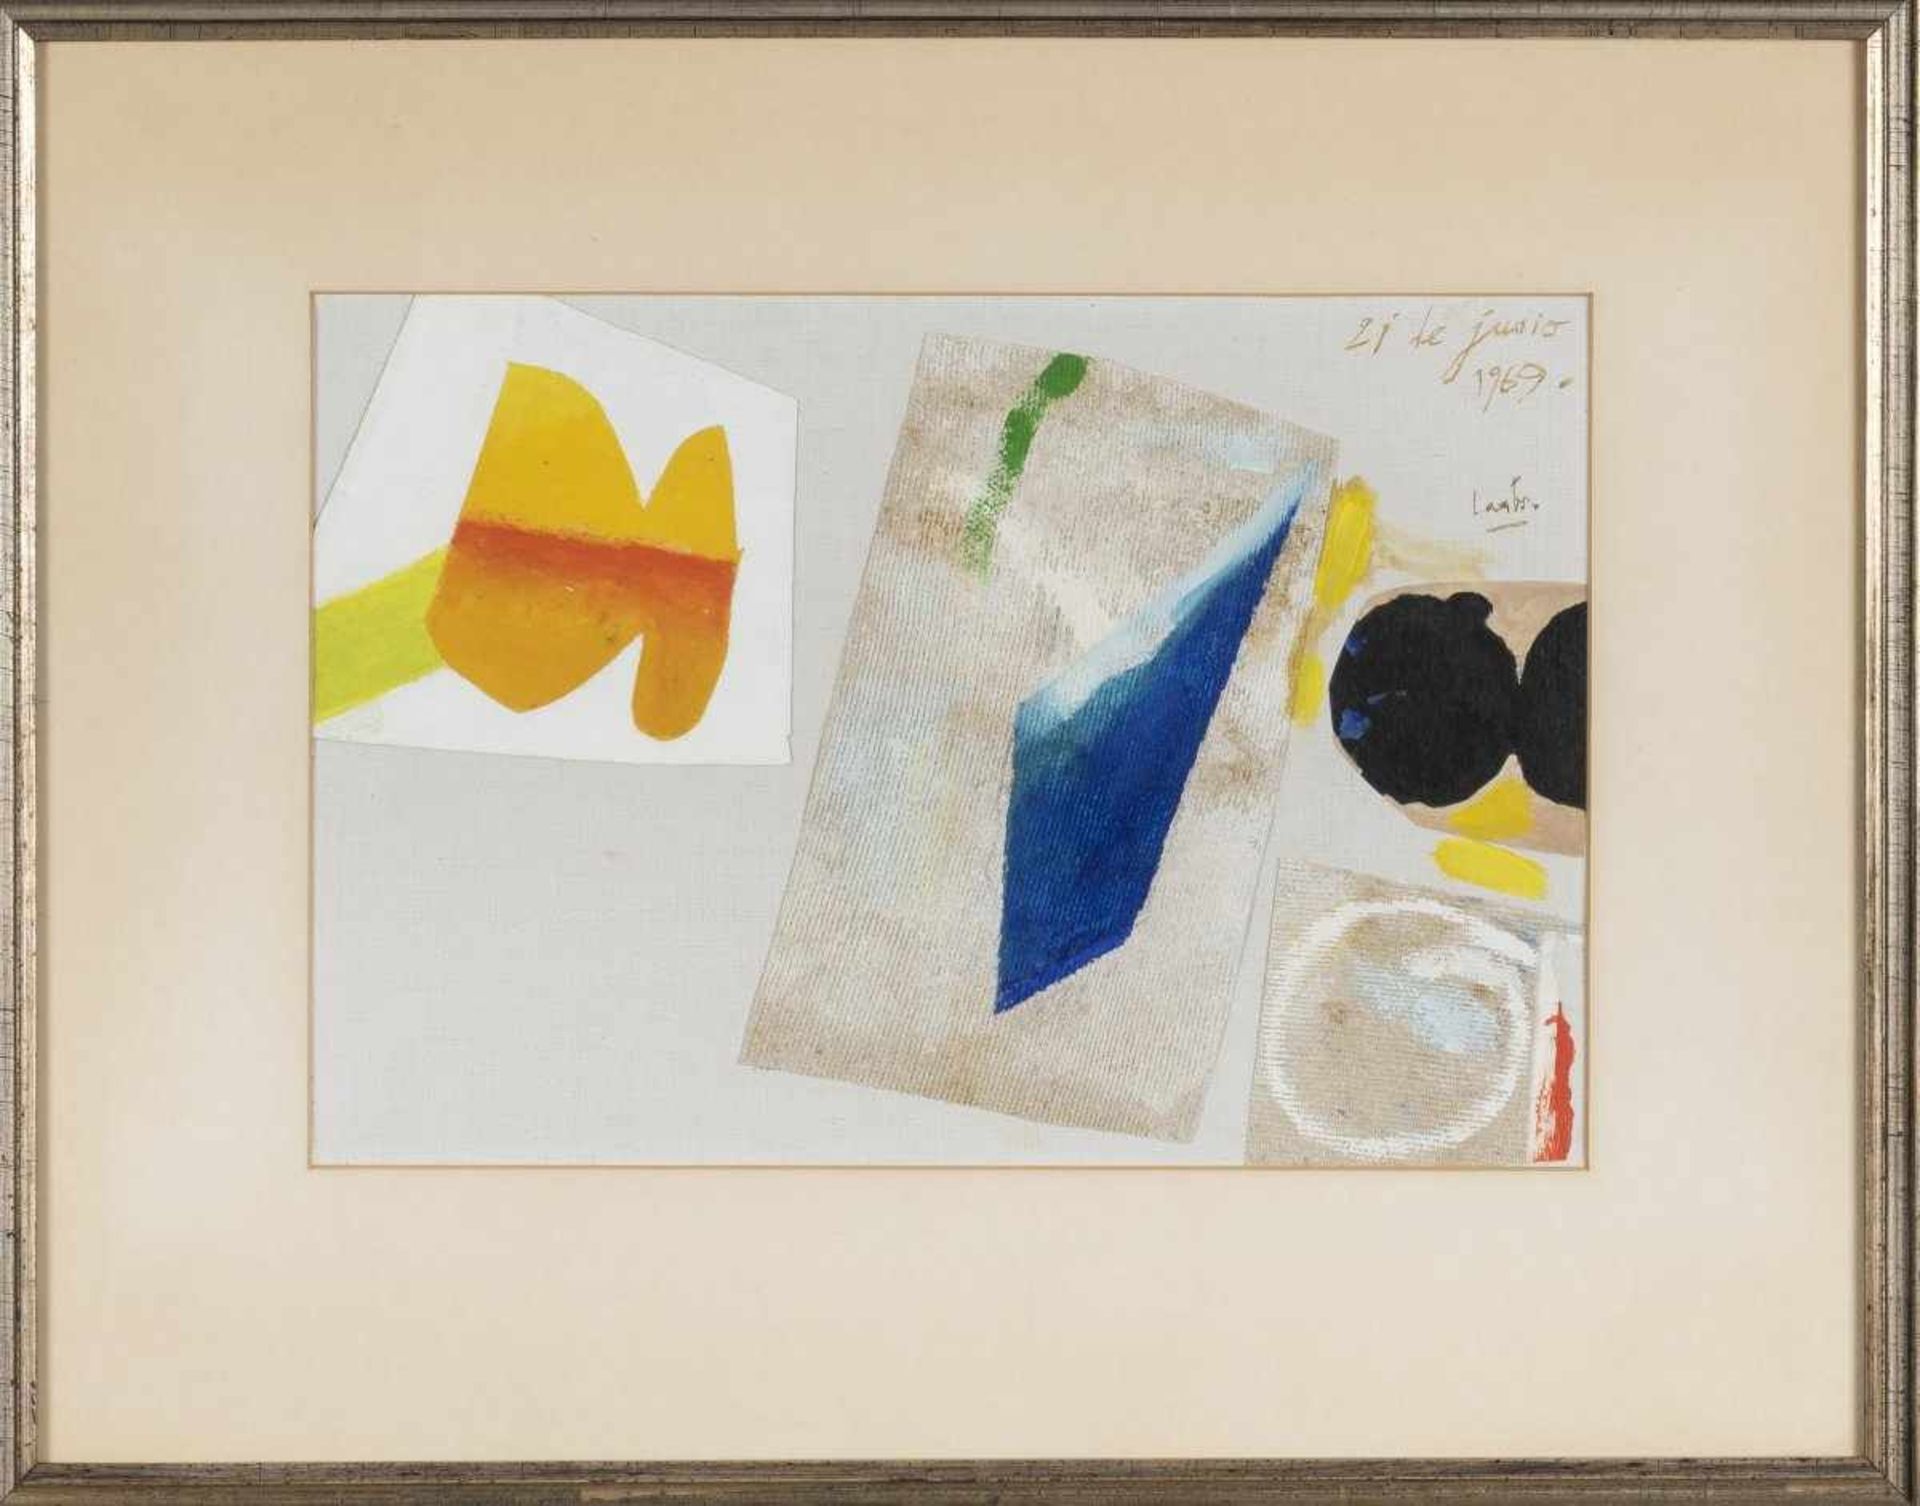 Hans Laabs, Untitled (abstract collage), 1969